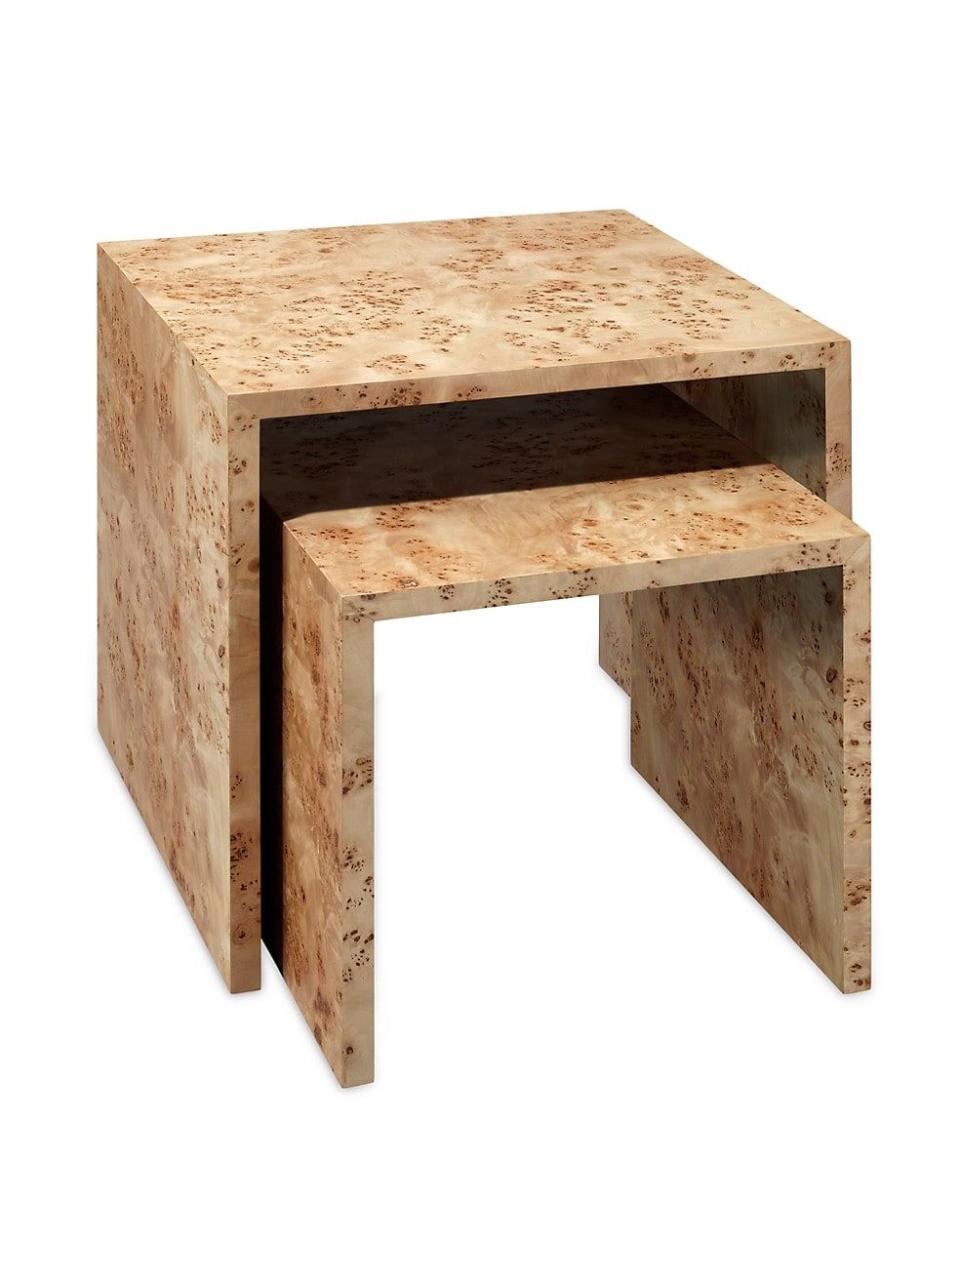 5) Jamie Young Co. Bedford Nesting Tables